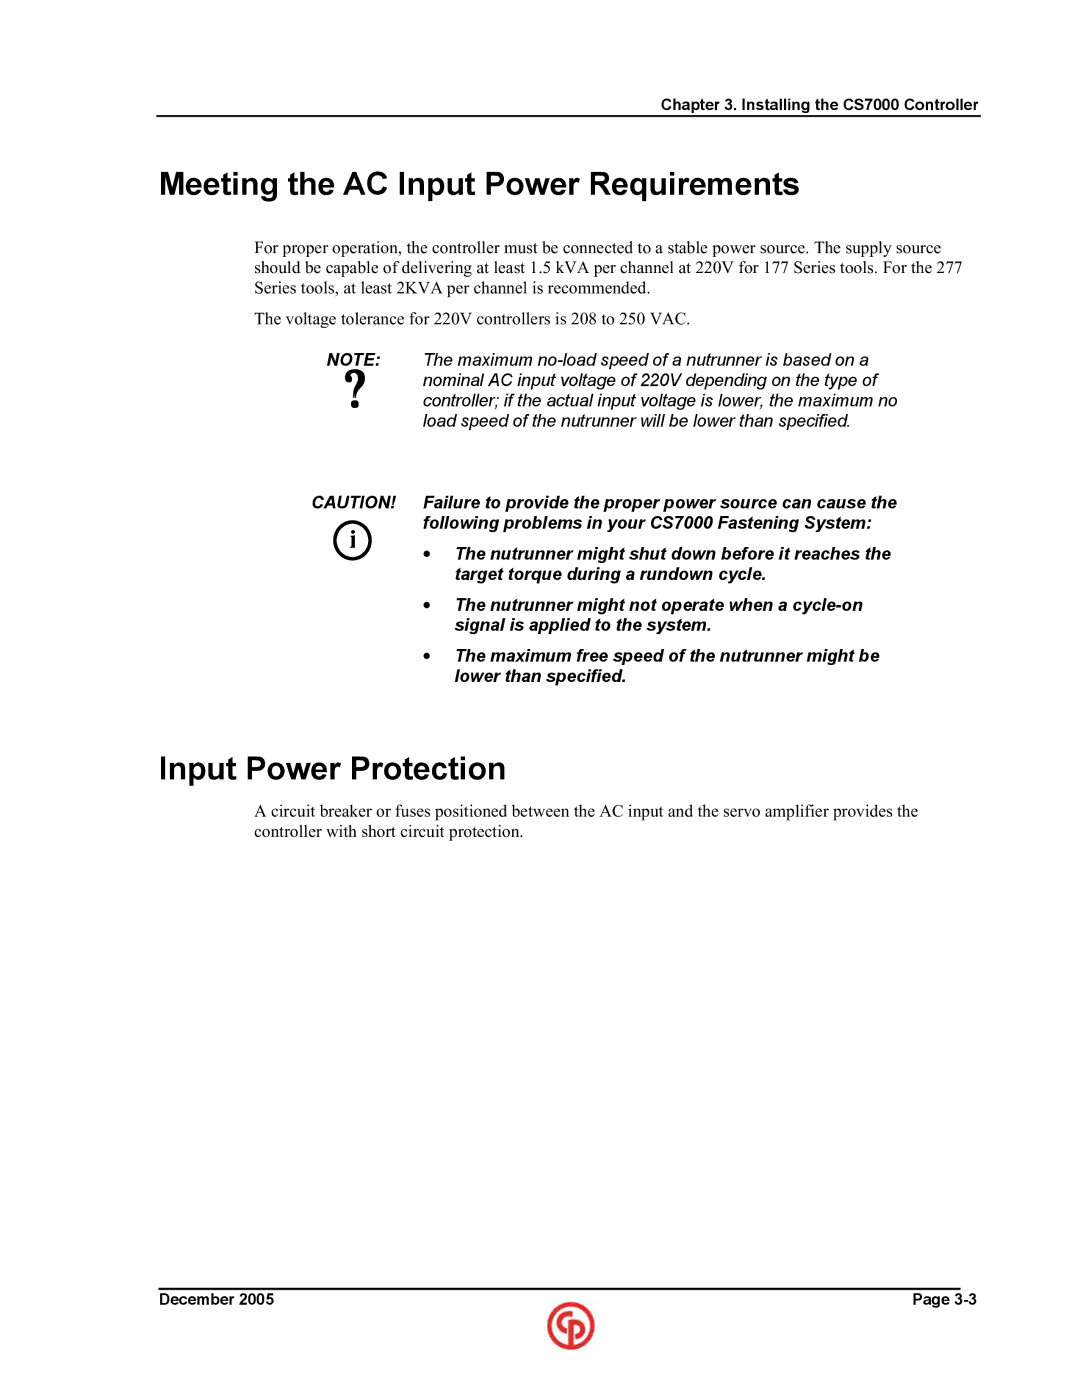 Chicago Pneumatic CS7000 manual Meeting the AC Input Power Requirements, Input Power Protection 